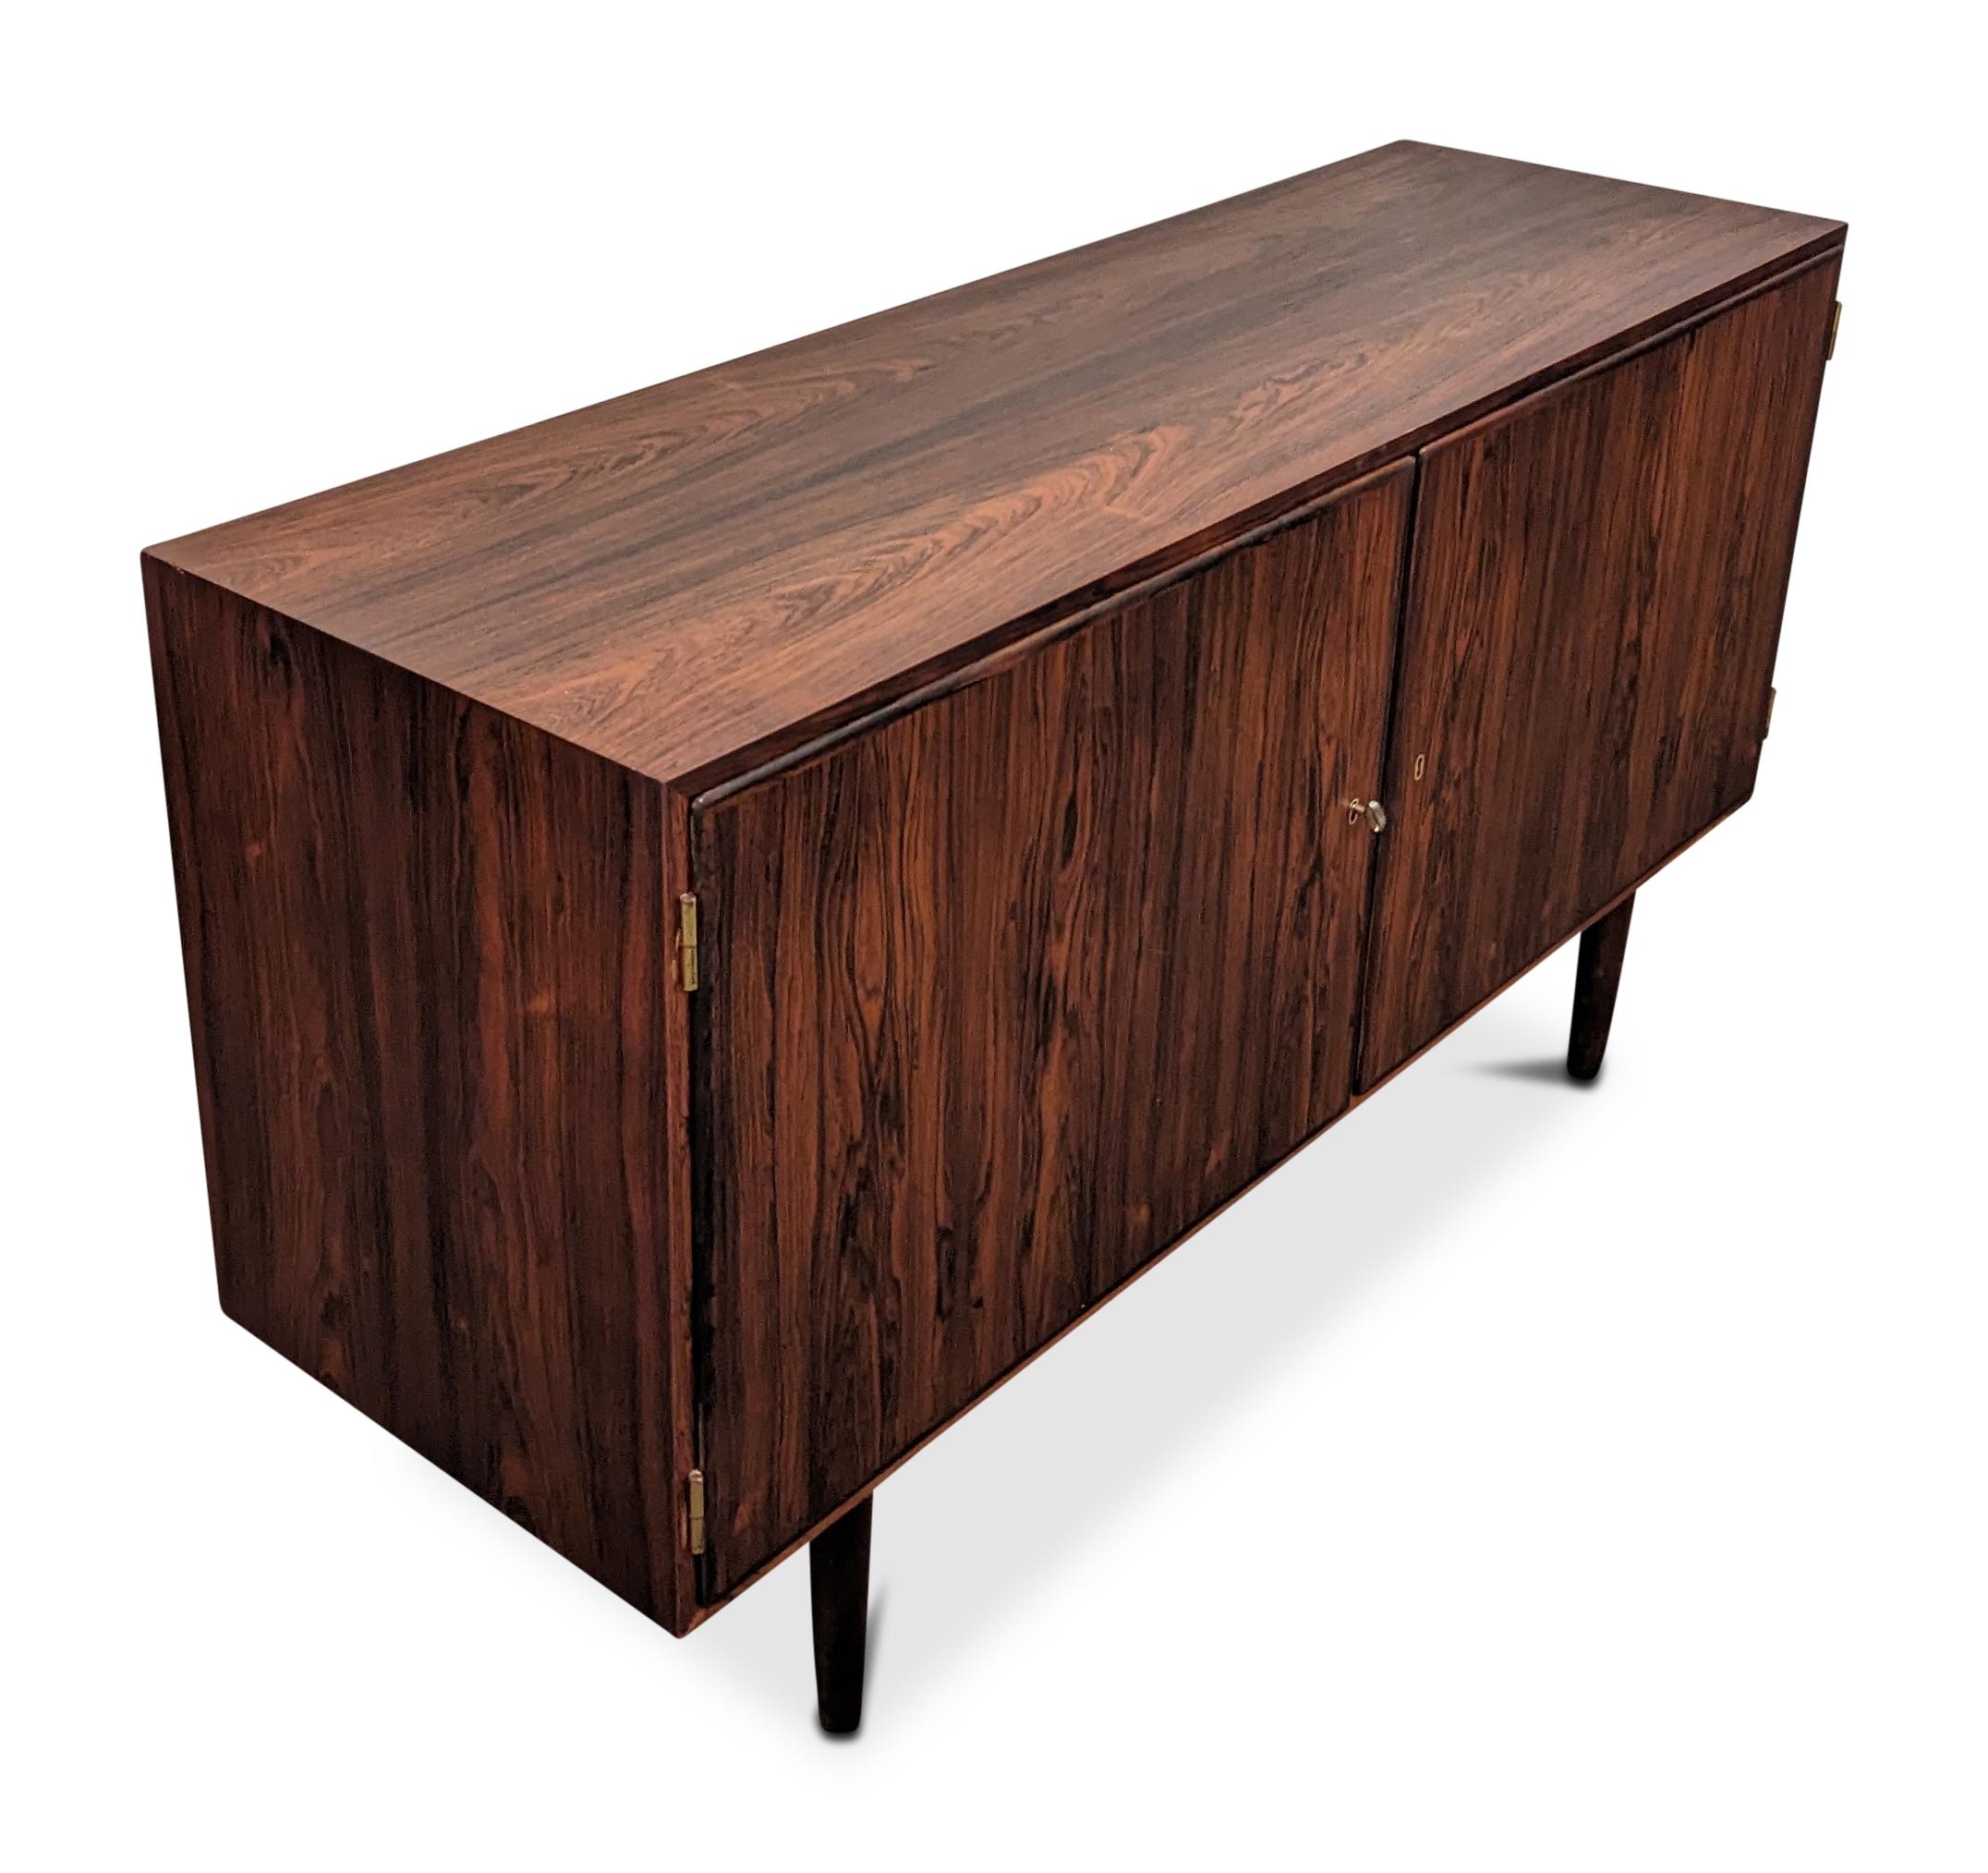 Vintage Danish Mid Century Rosewood Sideboard / Cabinet - 122363 In Good Condition For Sale In Jersey City, NJ